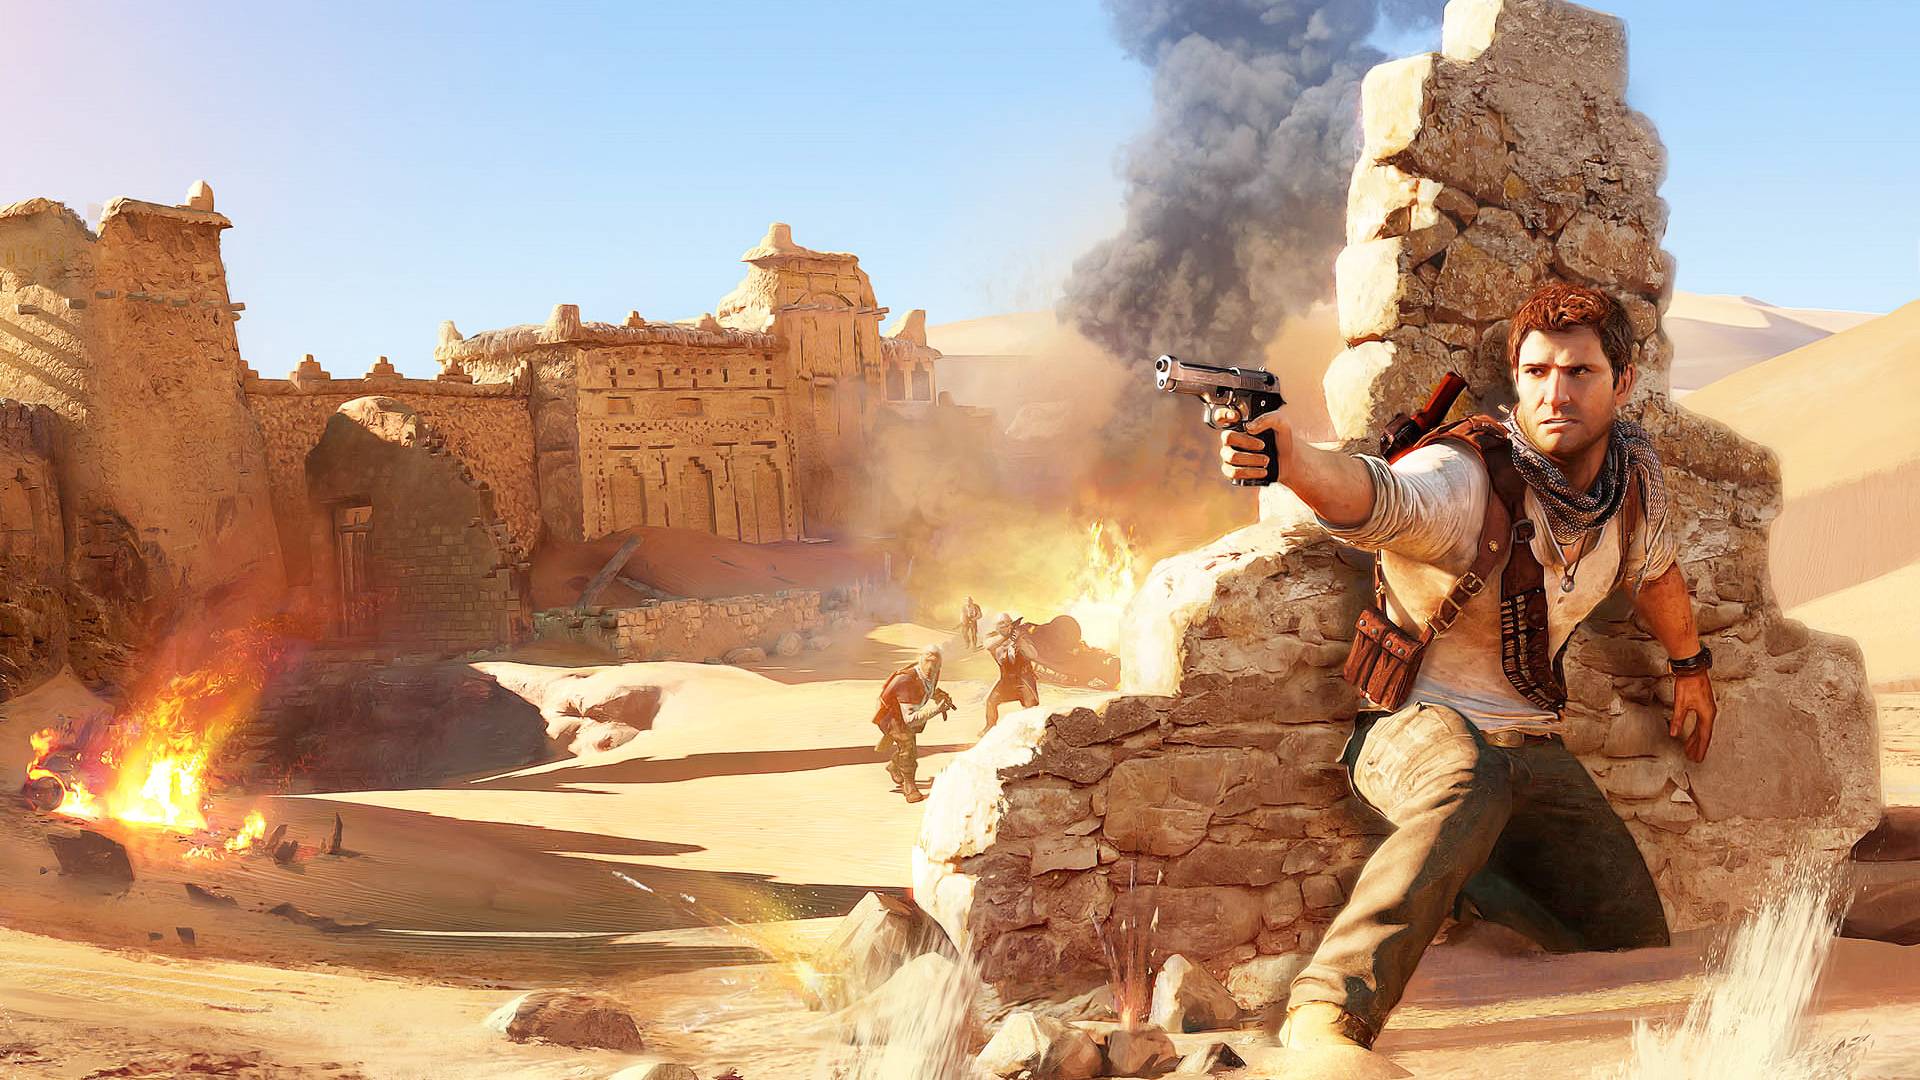 Uncharted 3 Wallpapers in HD GamingBoltcom Video Game News 1920x1080